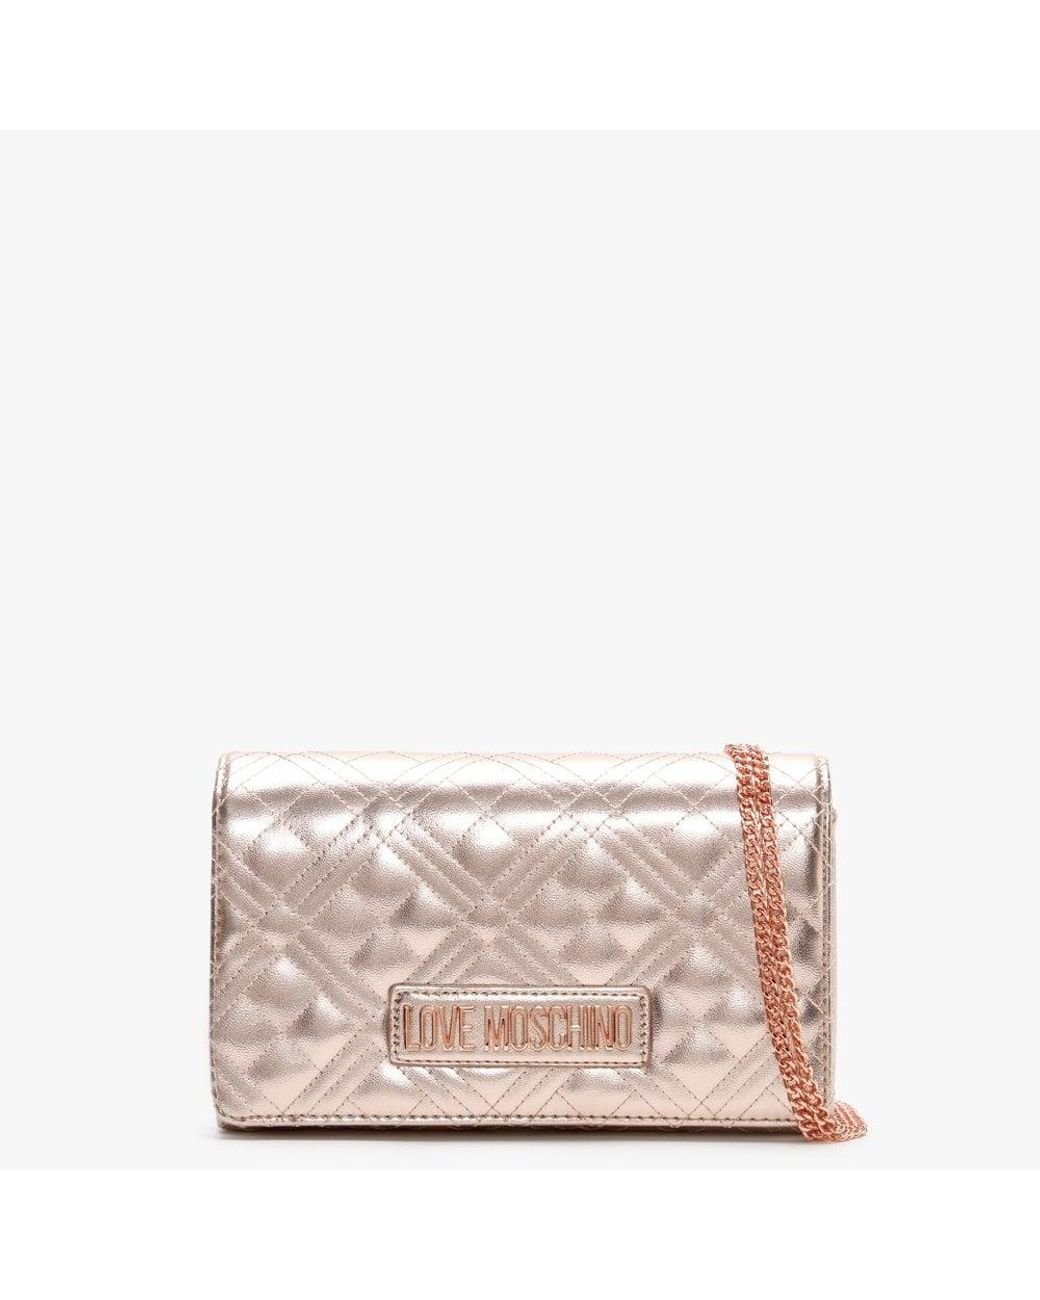 Love Moschino Quilted Rose Gold Clutch Bag | Lyst UK